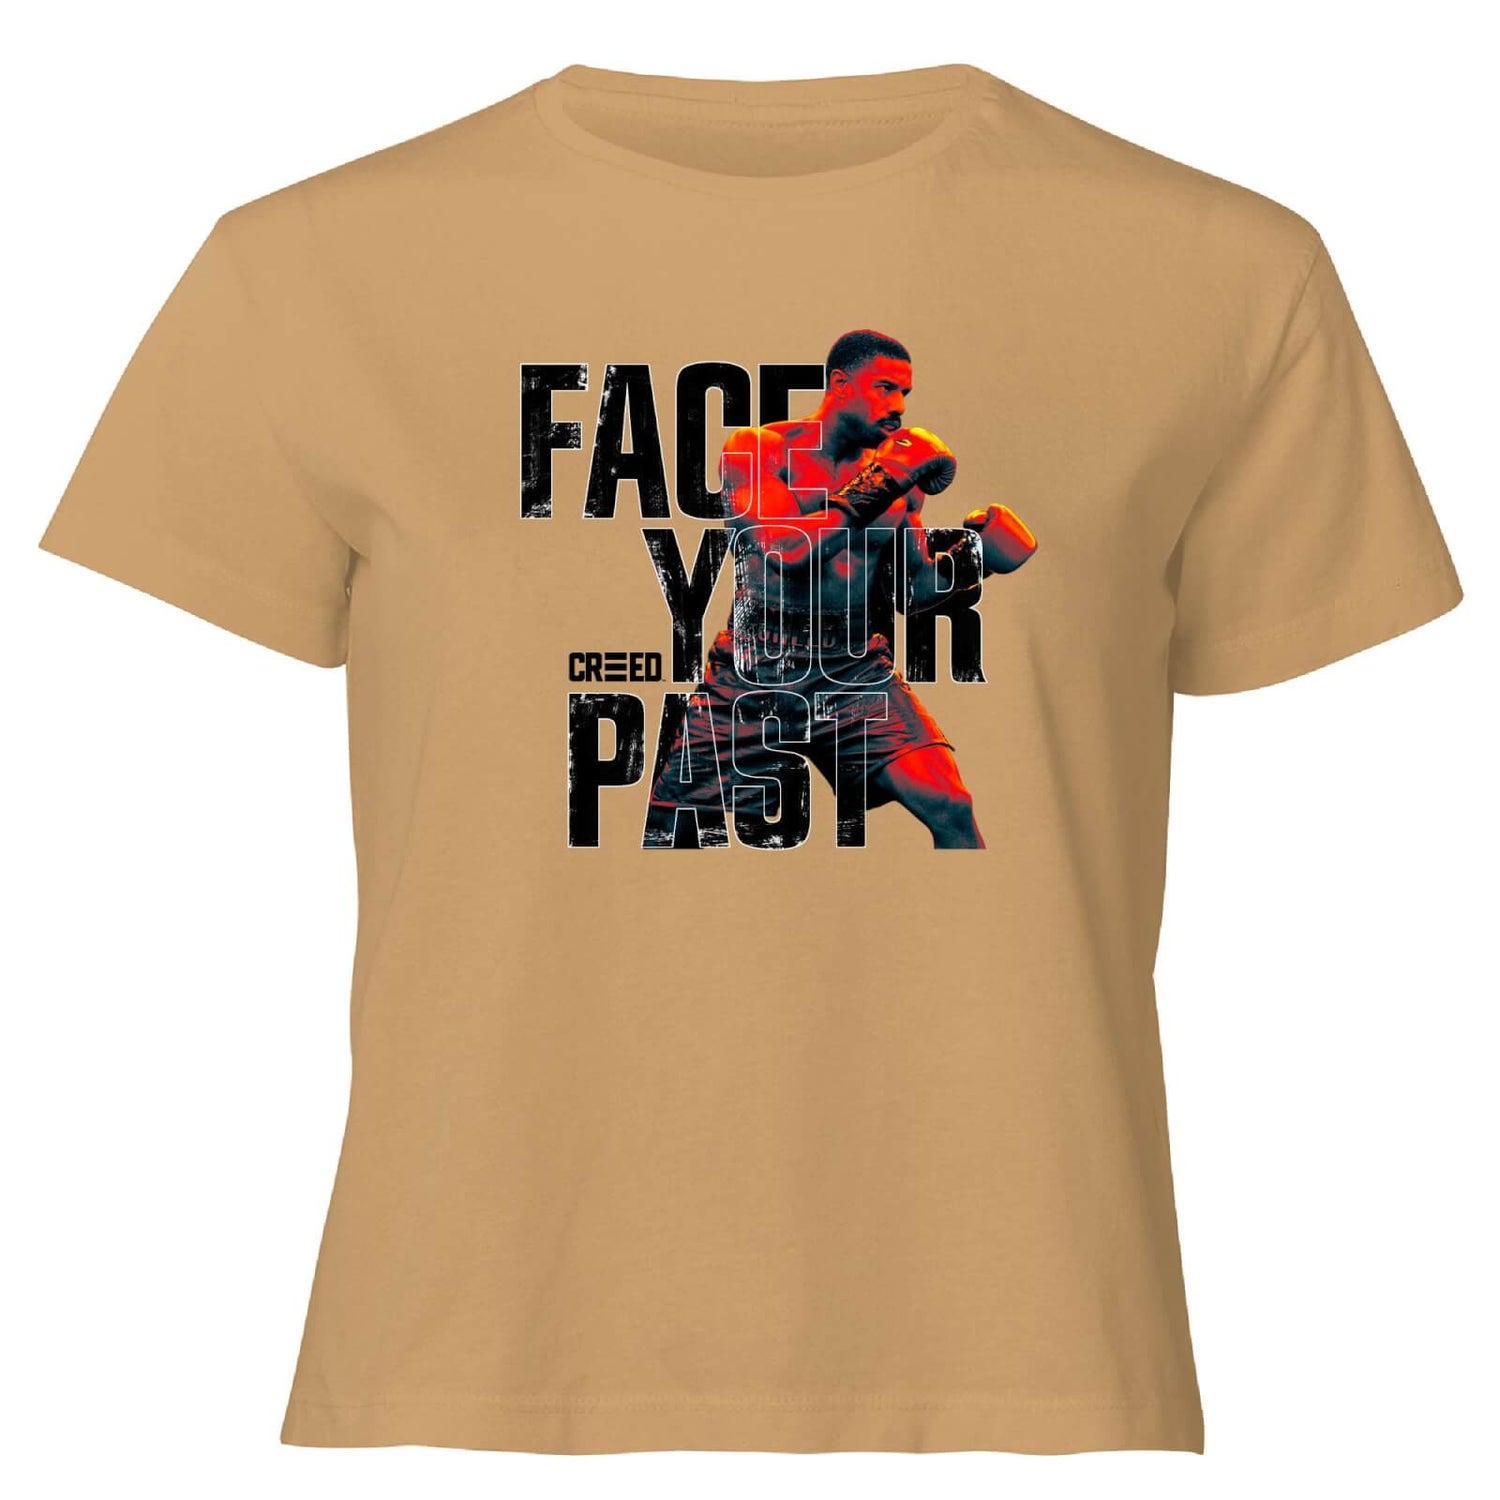 Creed Face Your Past Women's Cropped T-Shirt - Tan